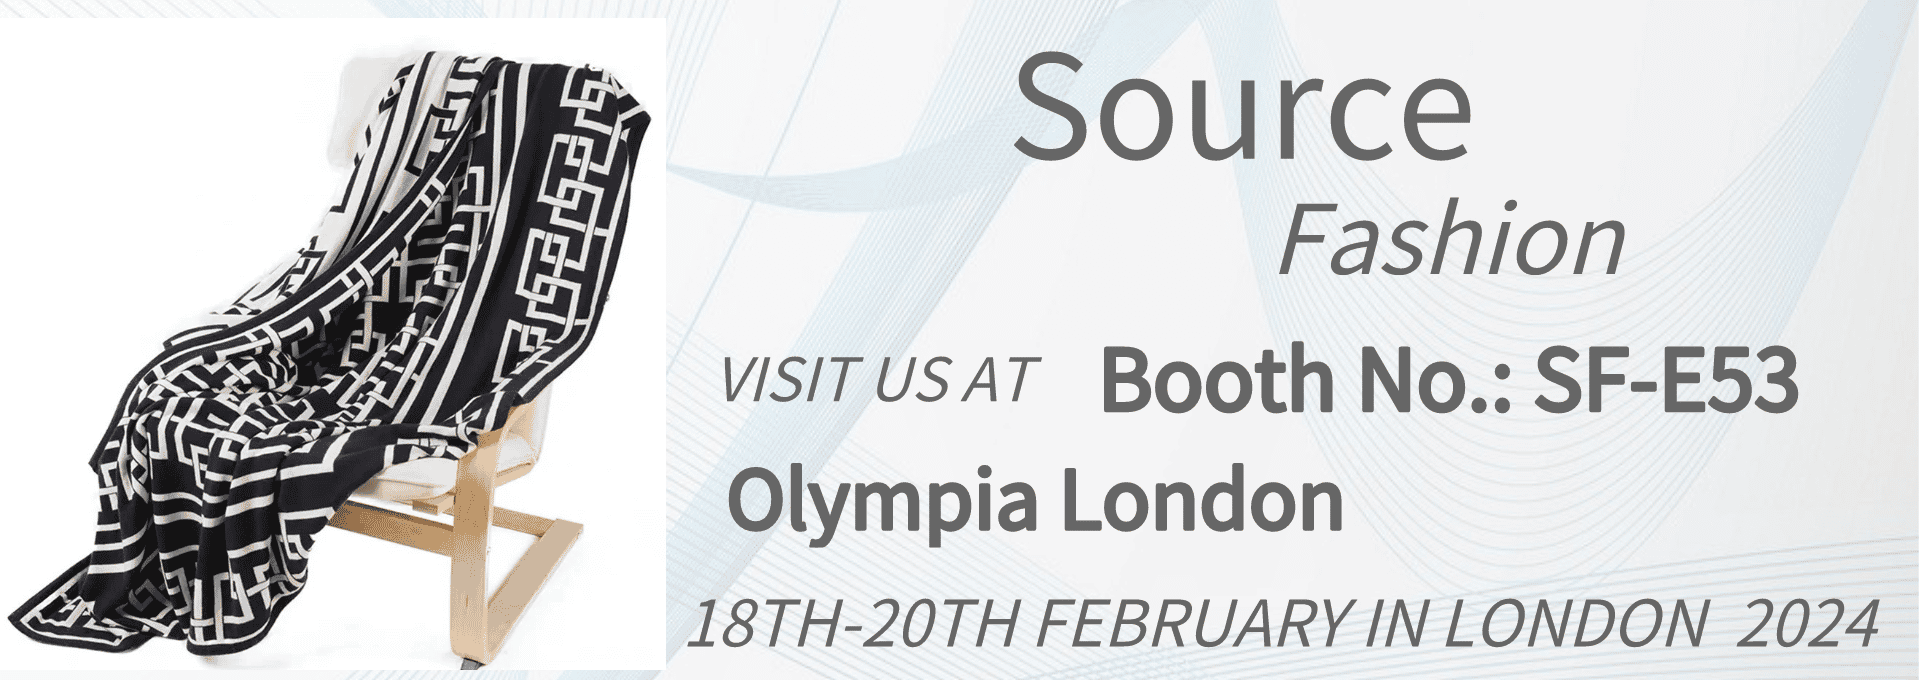 Welcom To Visit Us-Source Fashion in London during February 18th-20th, 2024